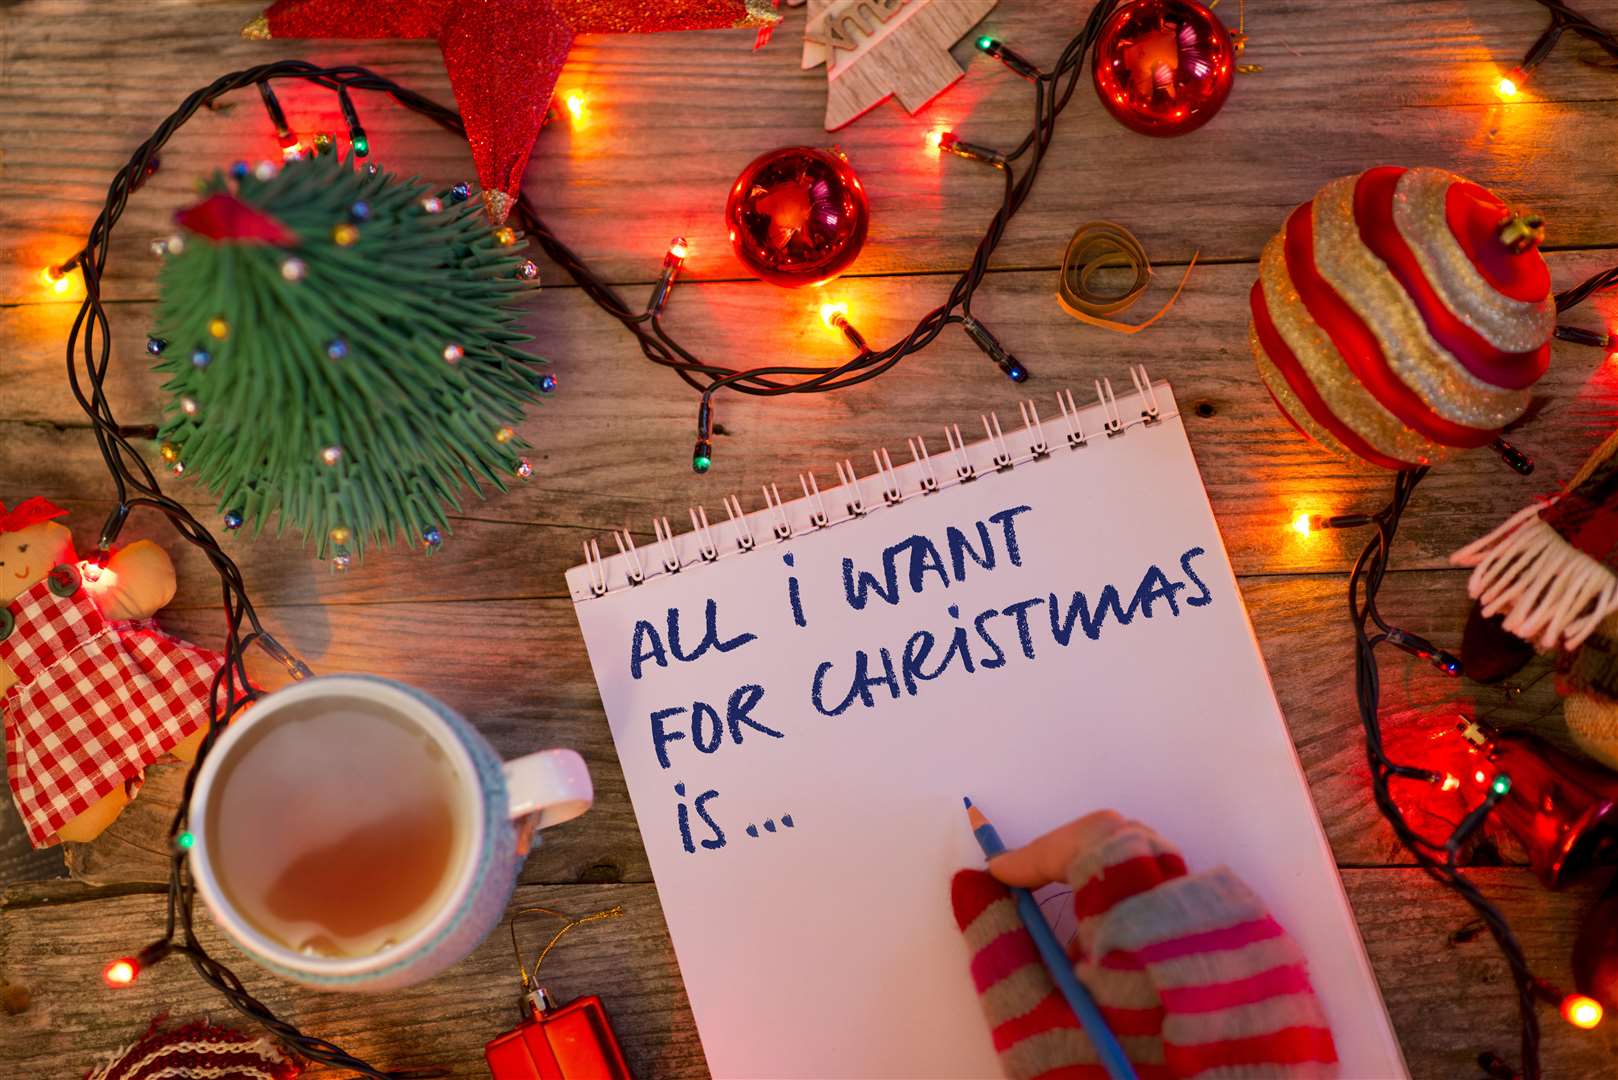 “All I want for Christmas is…” text on notebook written by young woman with colorful gloves in festive decor